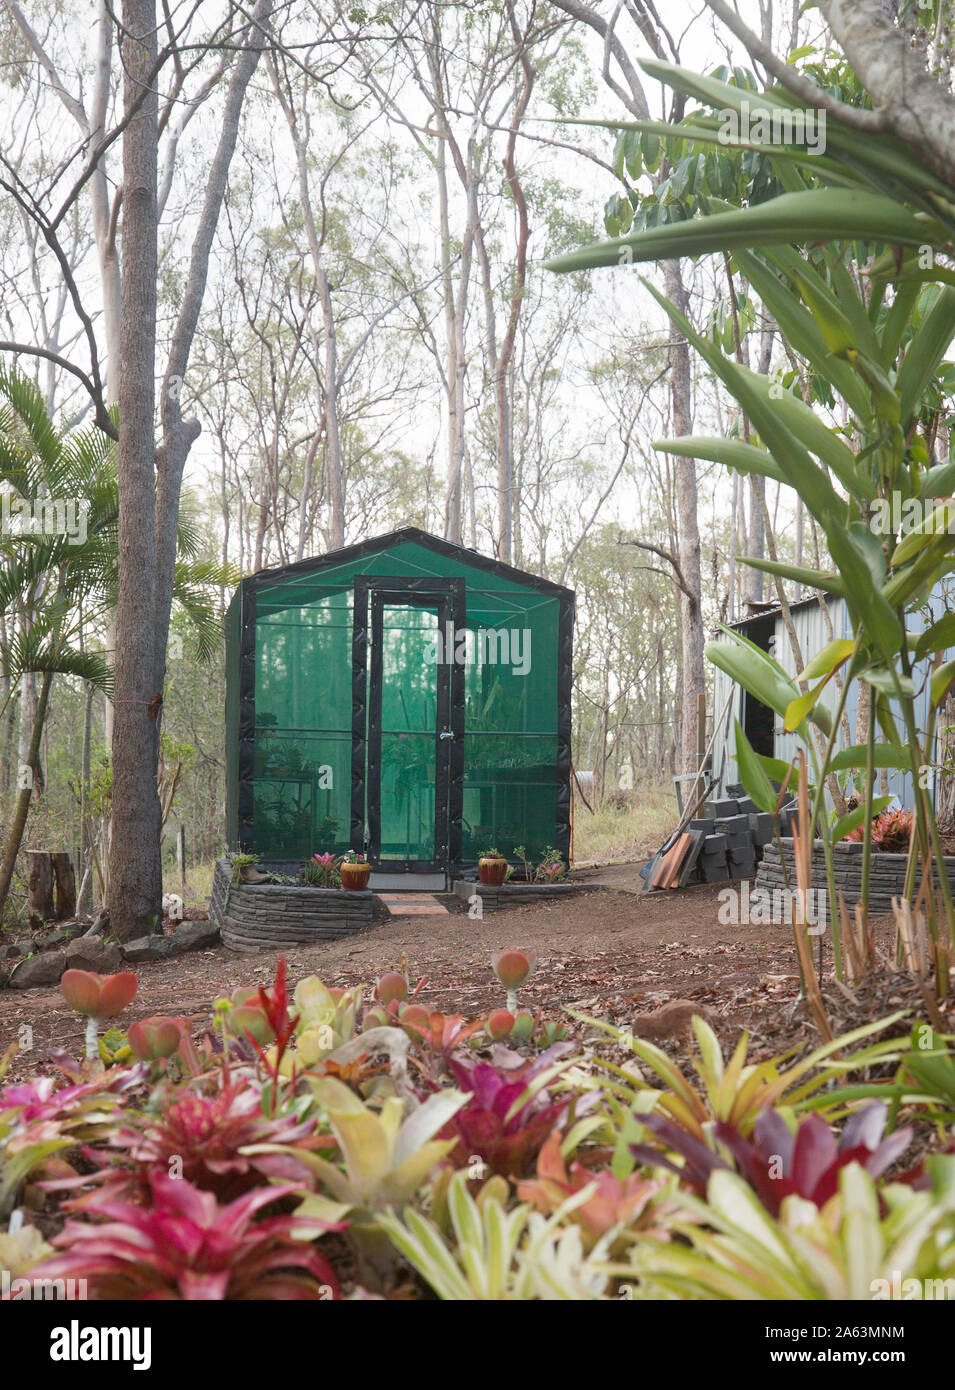 Home garden shadehouse with brick edged garden beds, paved pathway and mass planted bromeliads in foreground Stock Photo